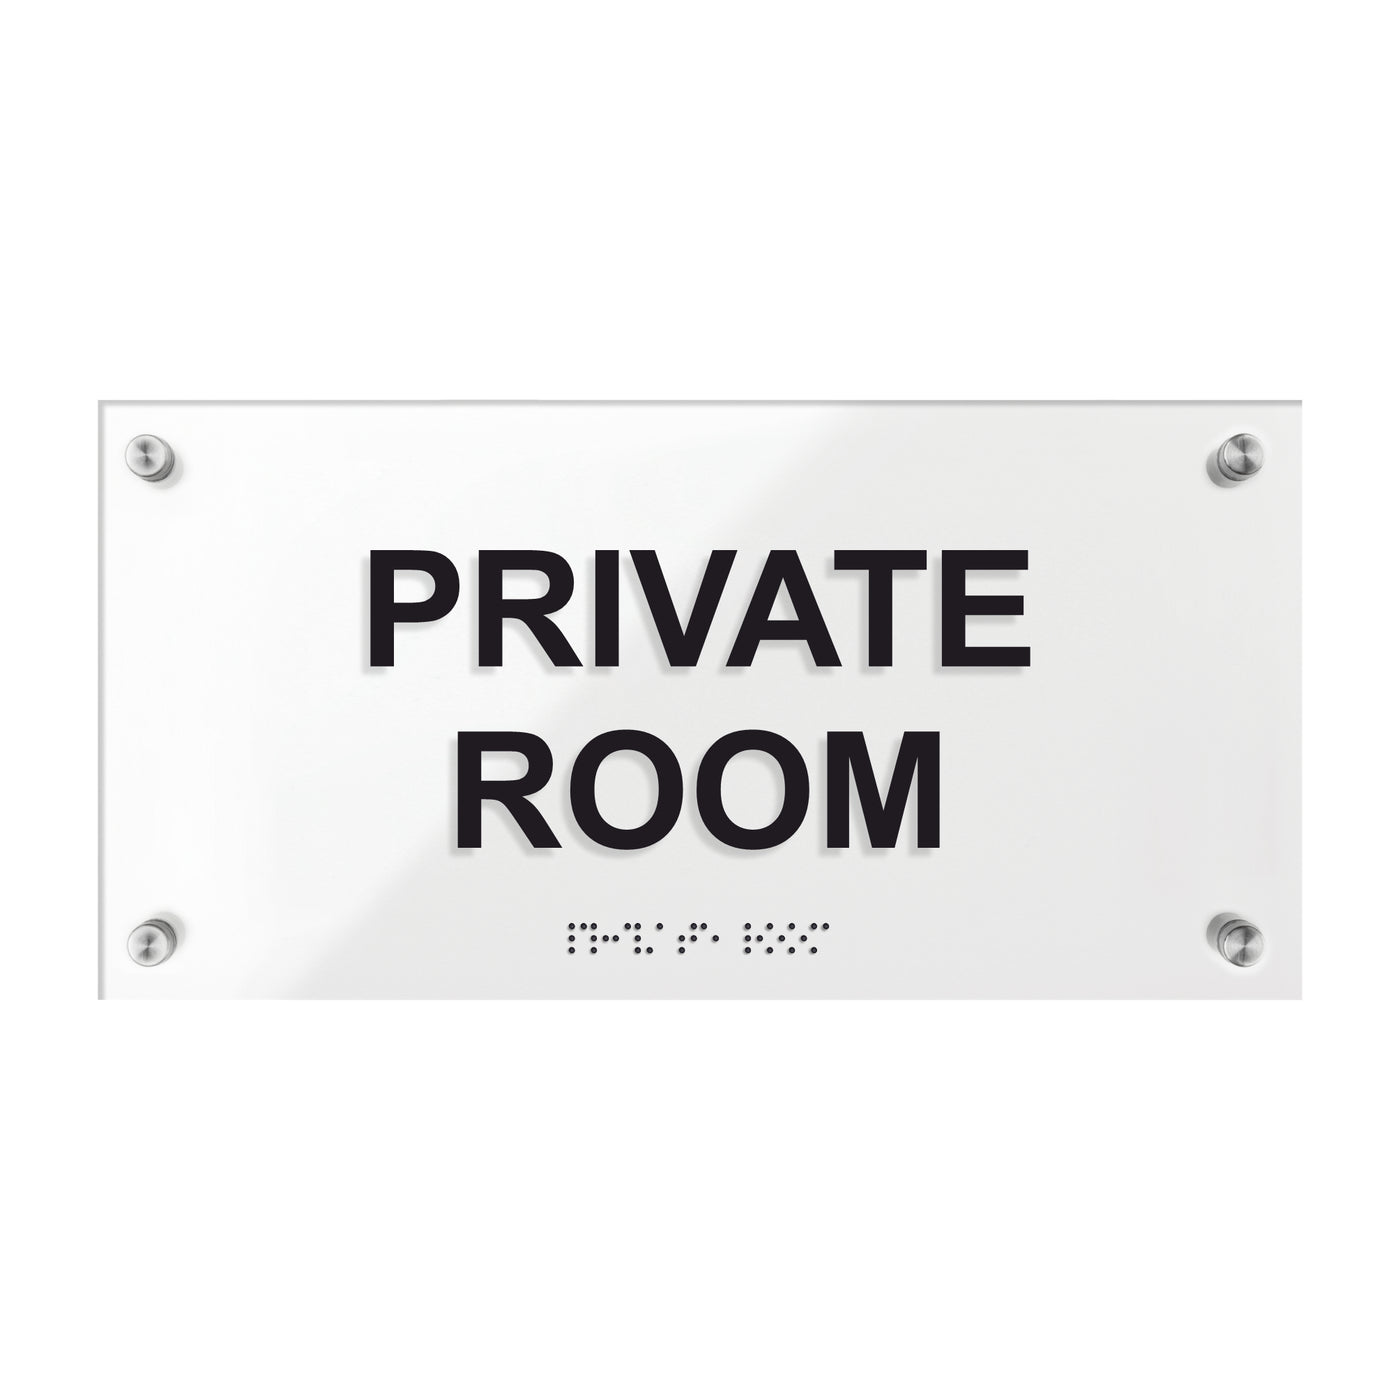 Private Room Signs - Acrylic Door Plate "Classic" Design